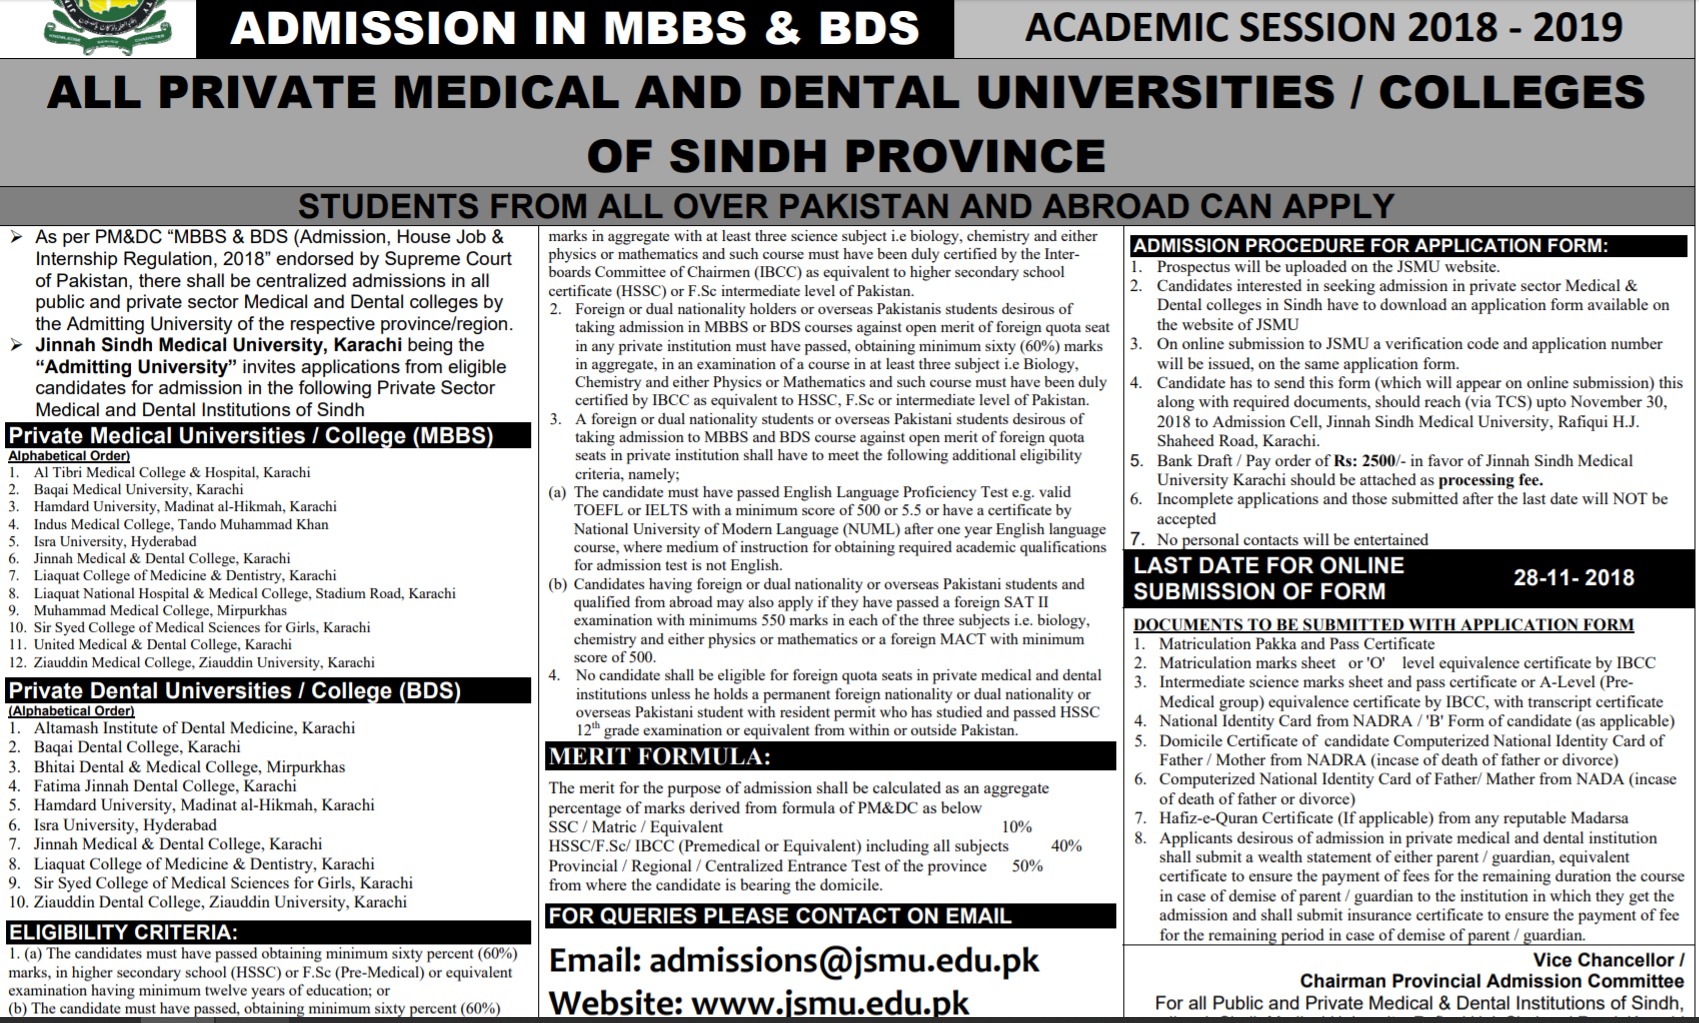 Sindh Private Medical Colleges Admission 2018-19